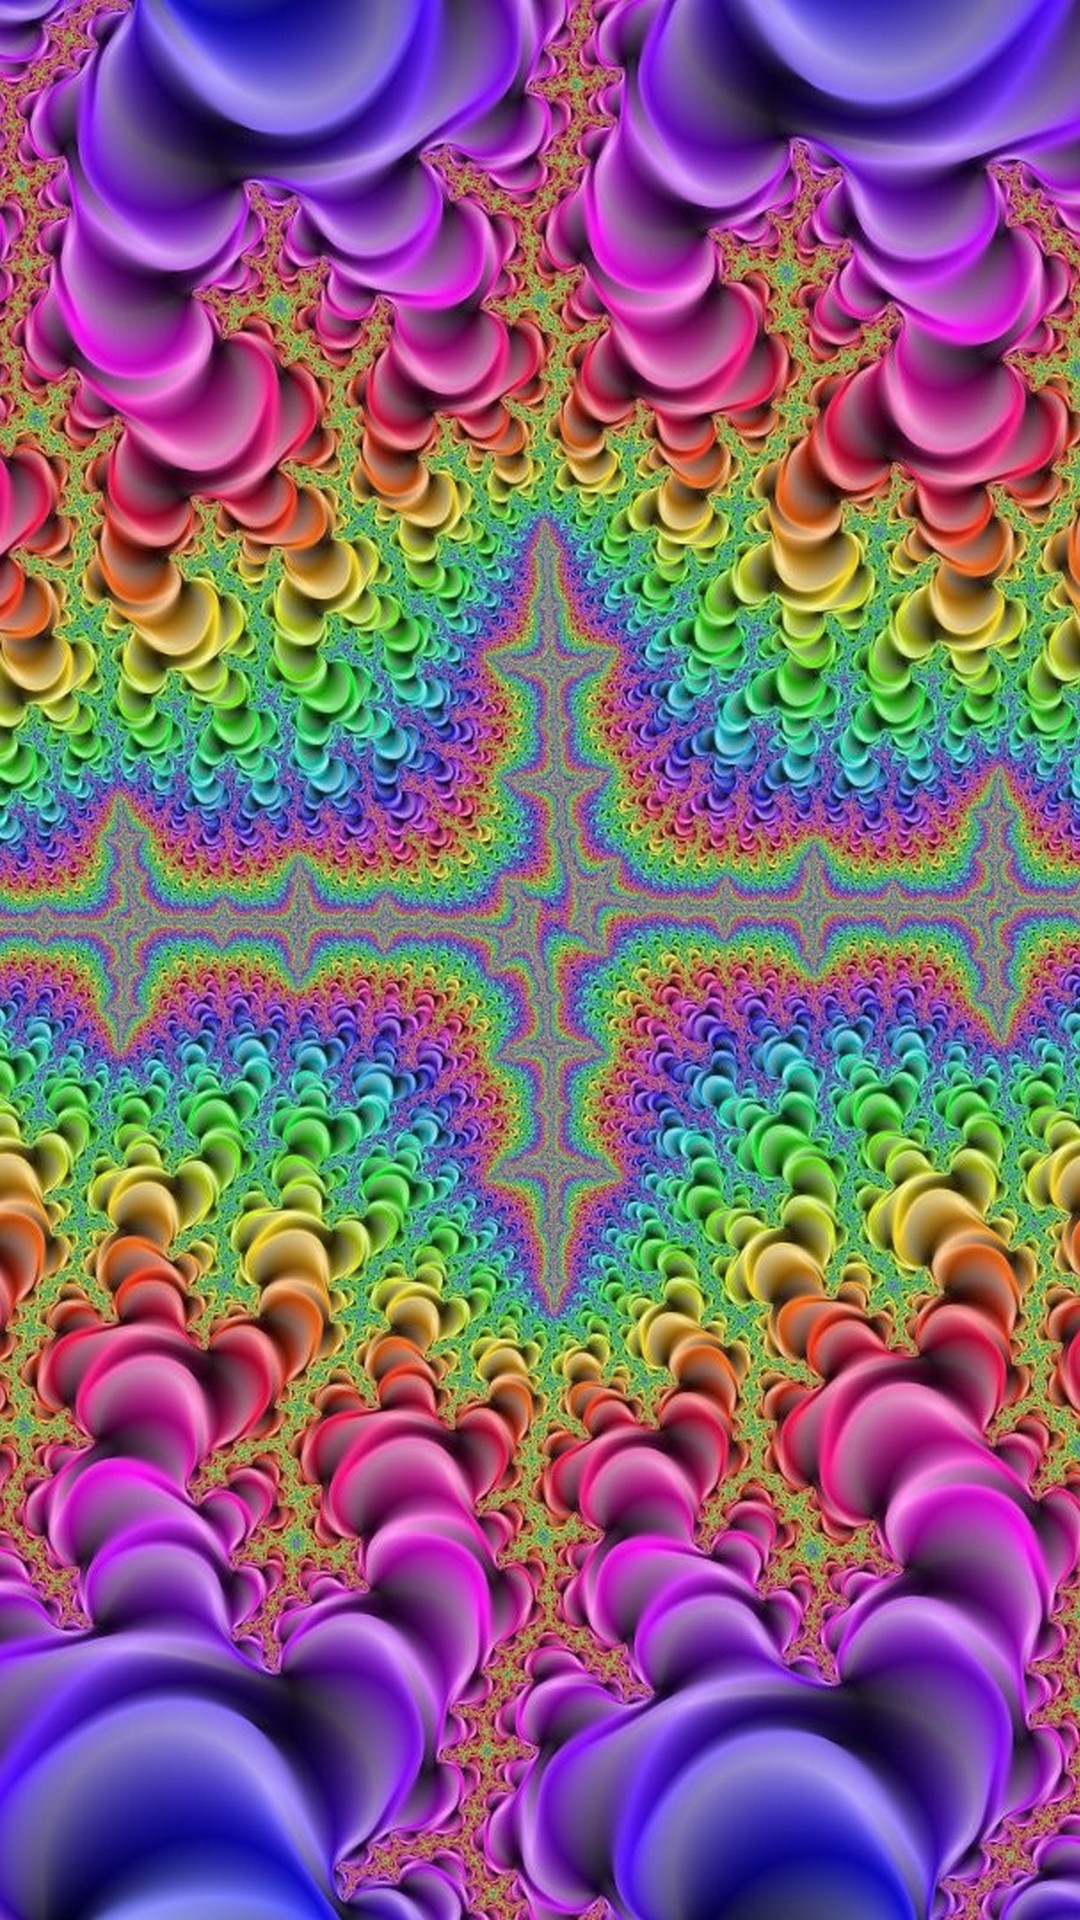 Psychedelic Wallpaper For Android with HD resolution 1080x1920